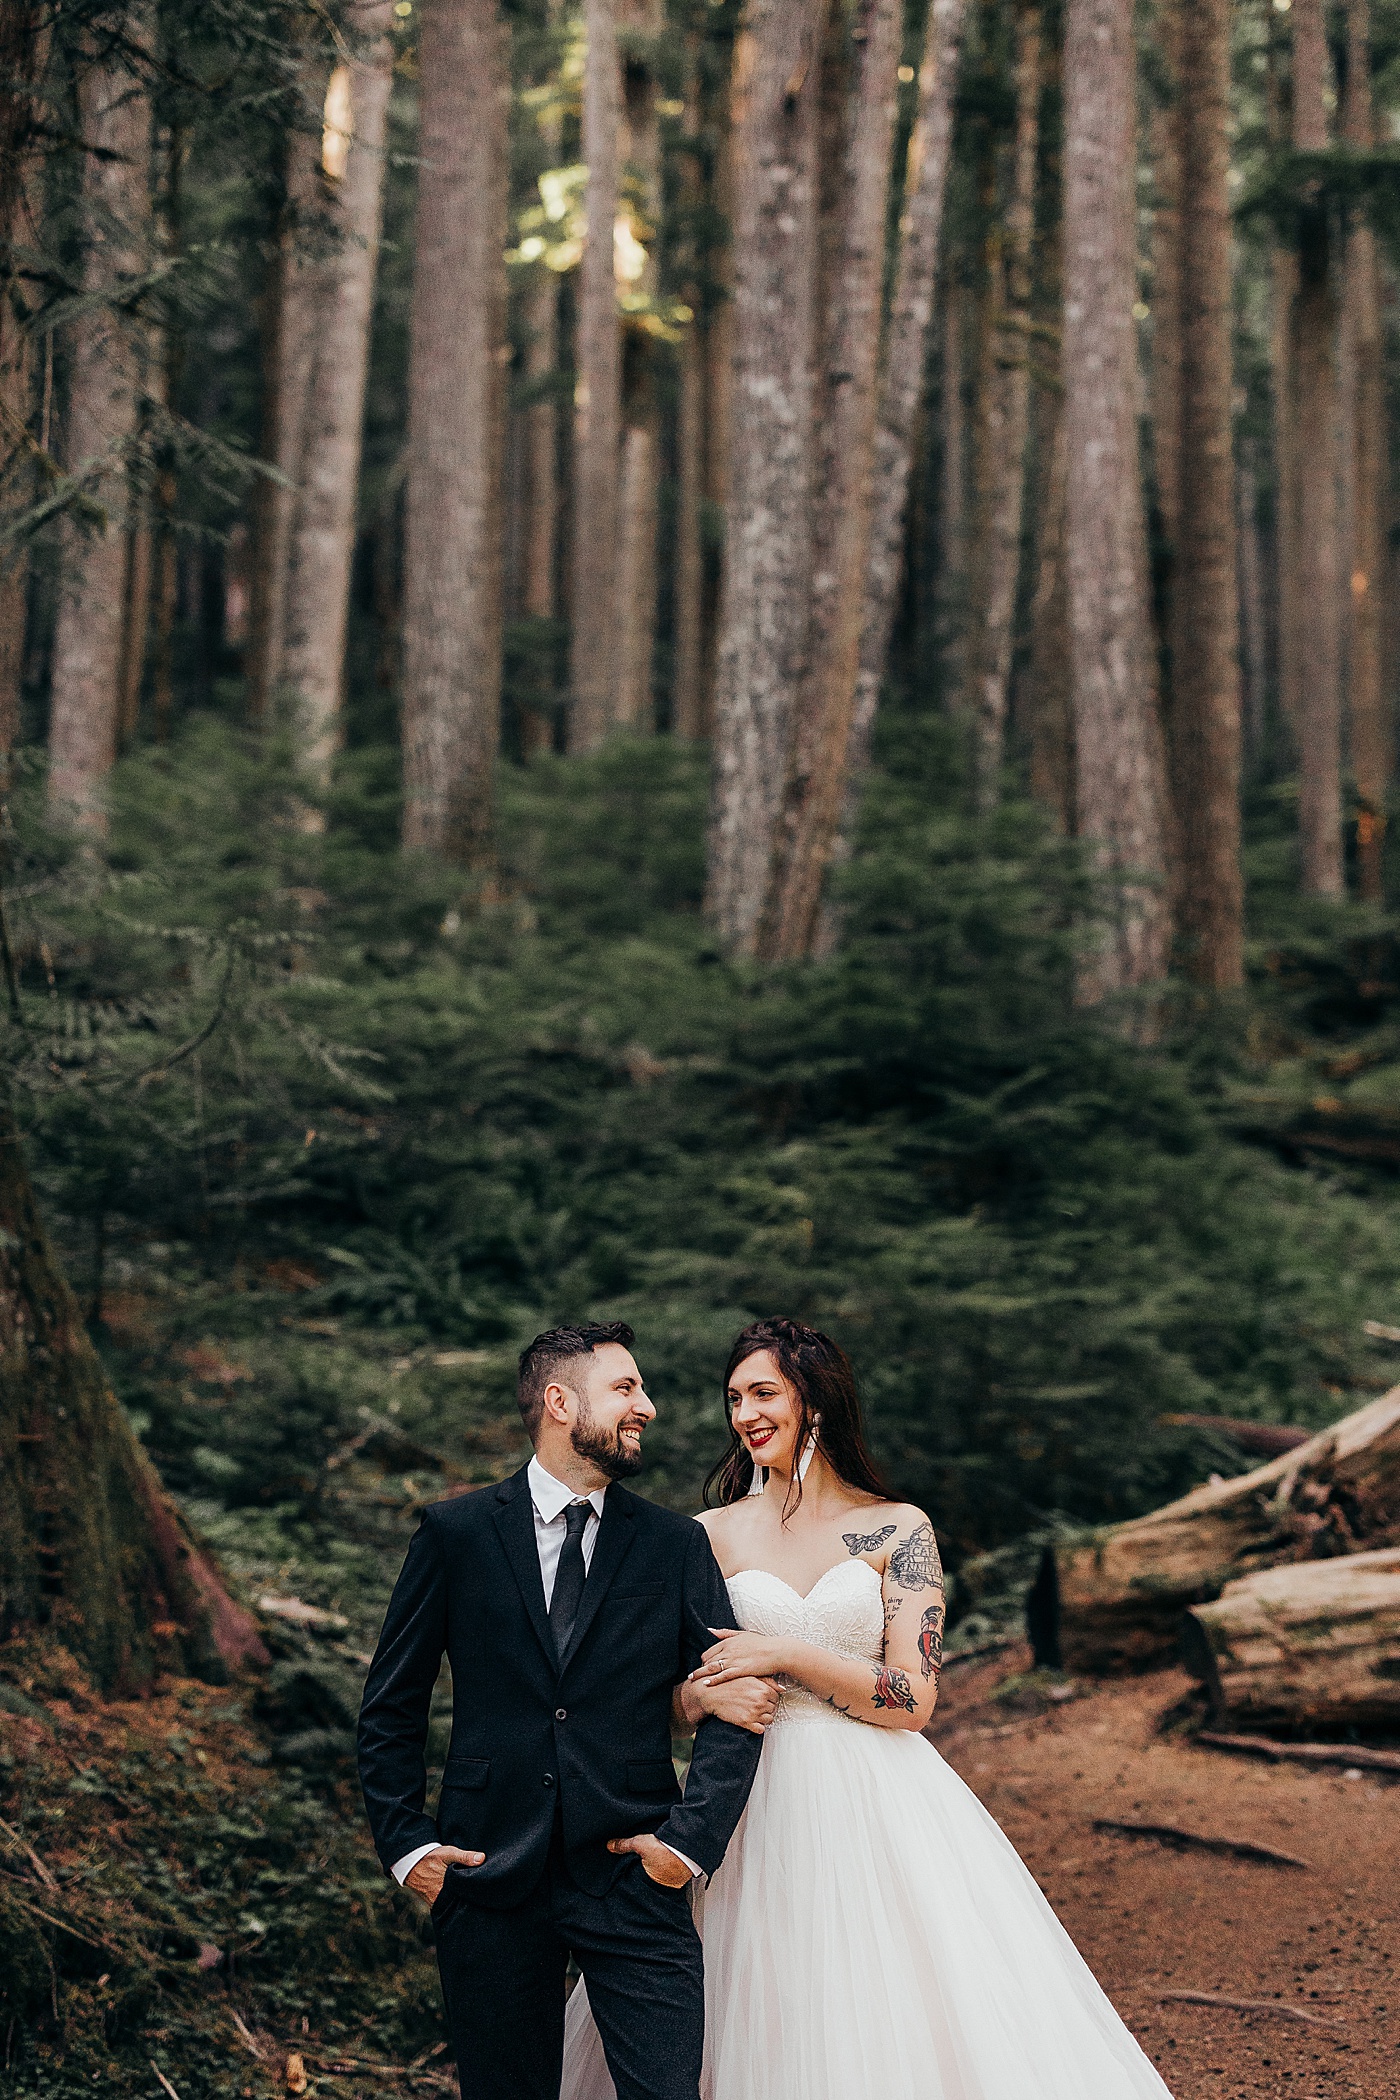 Bride and groom portraits in the forest in Mt. Rainier National Park | Photo by Megan Montalvo Photography